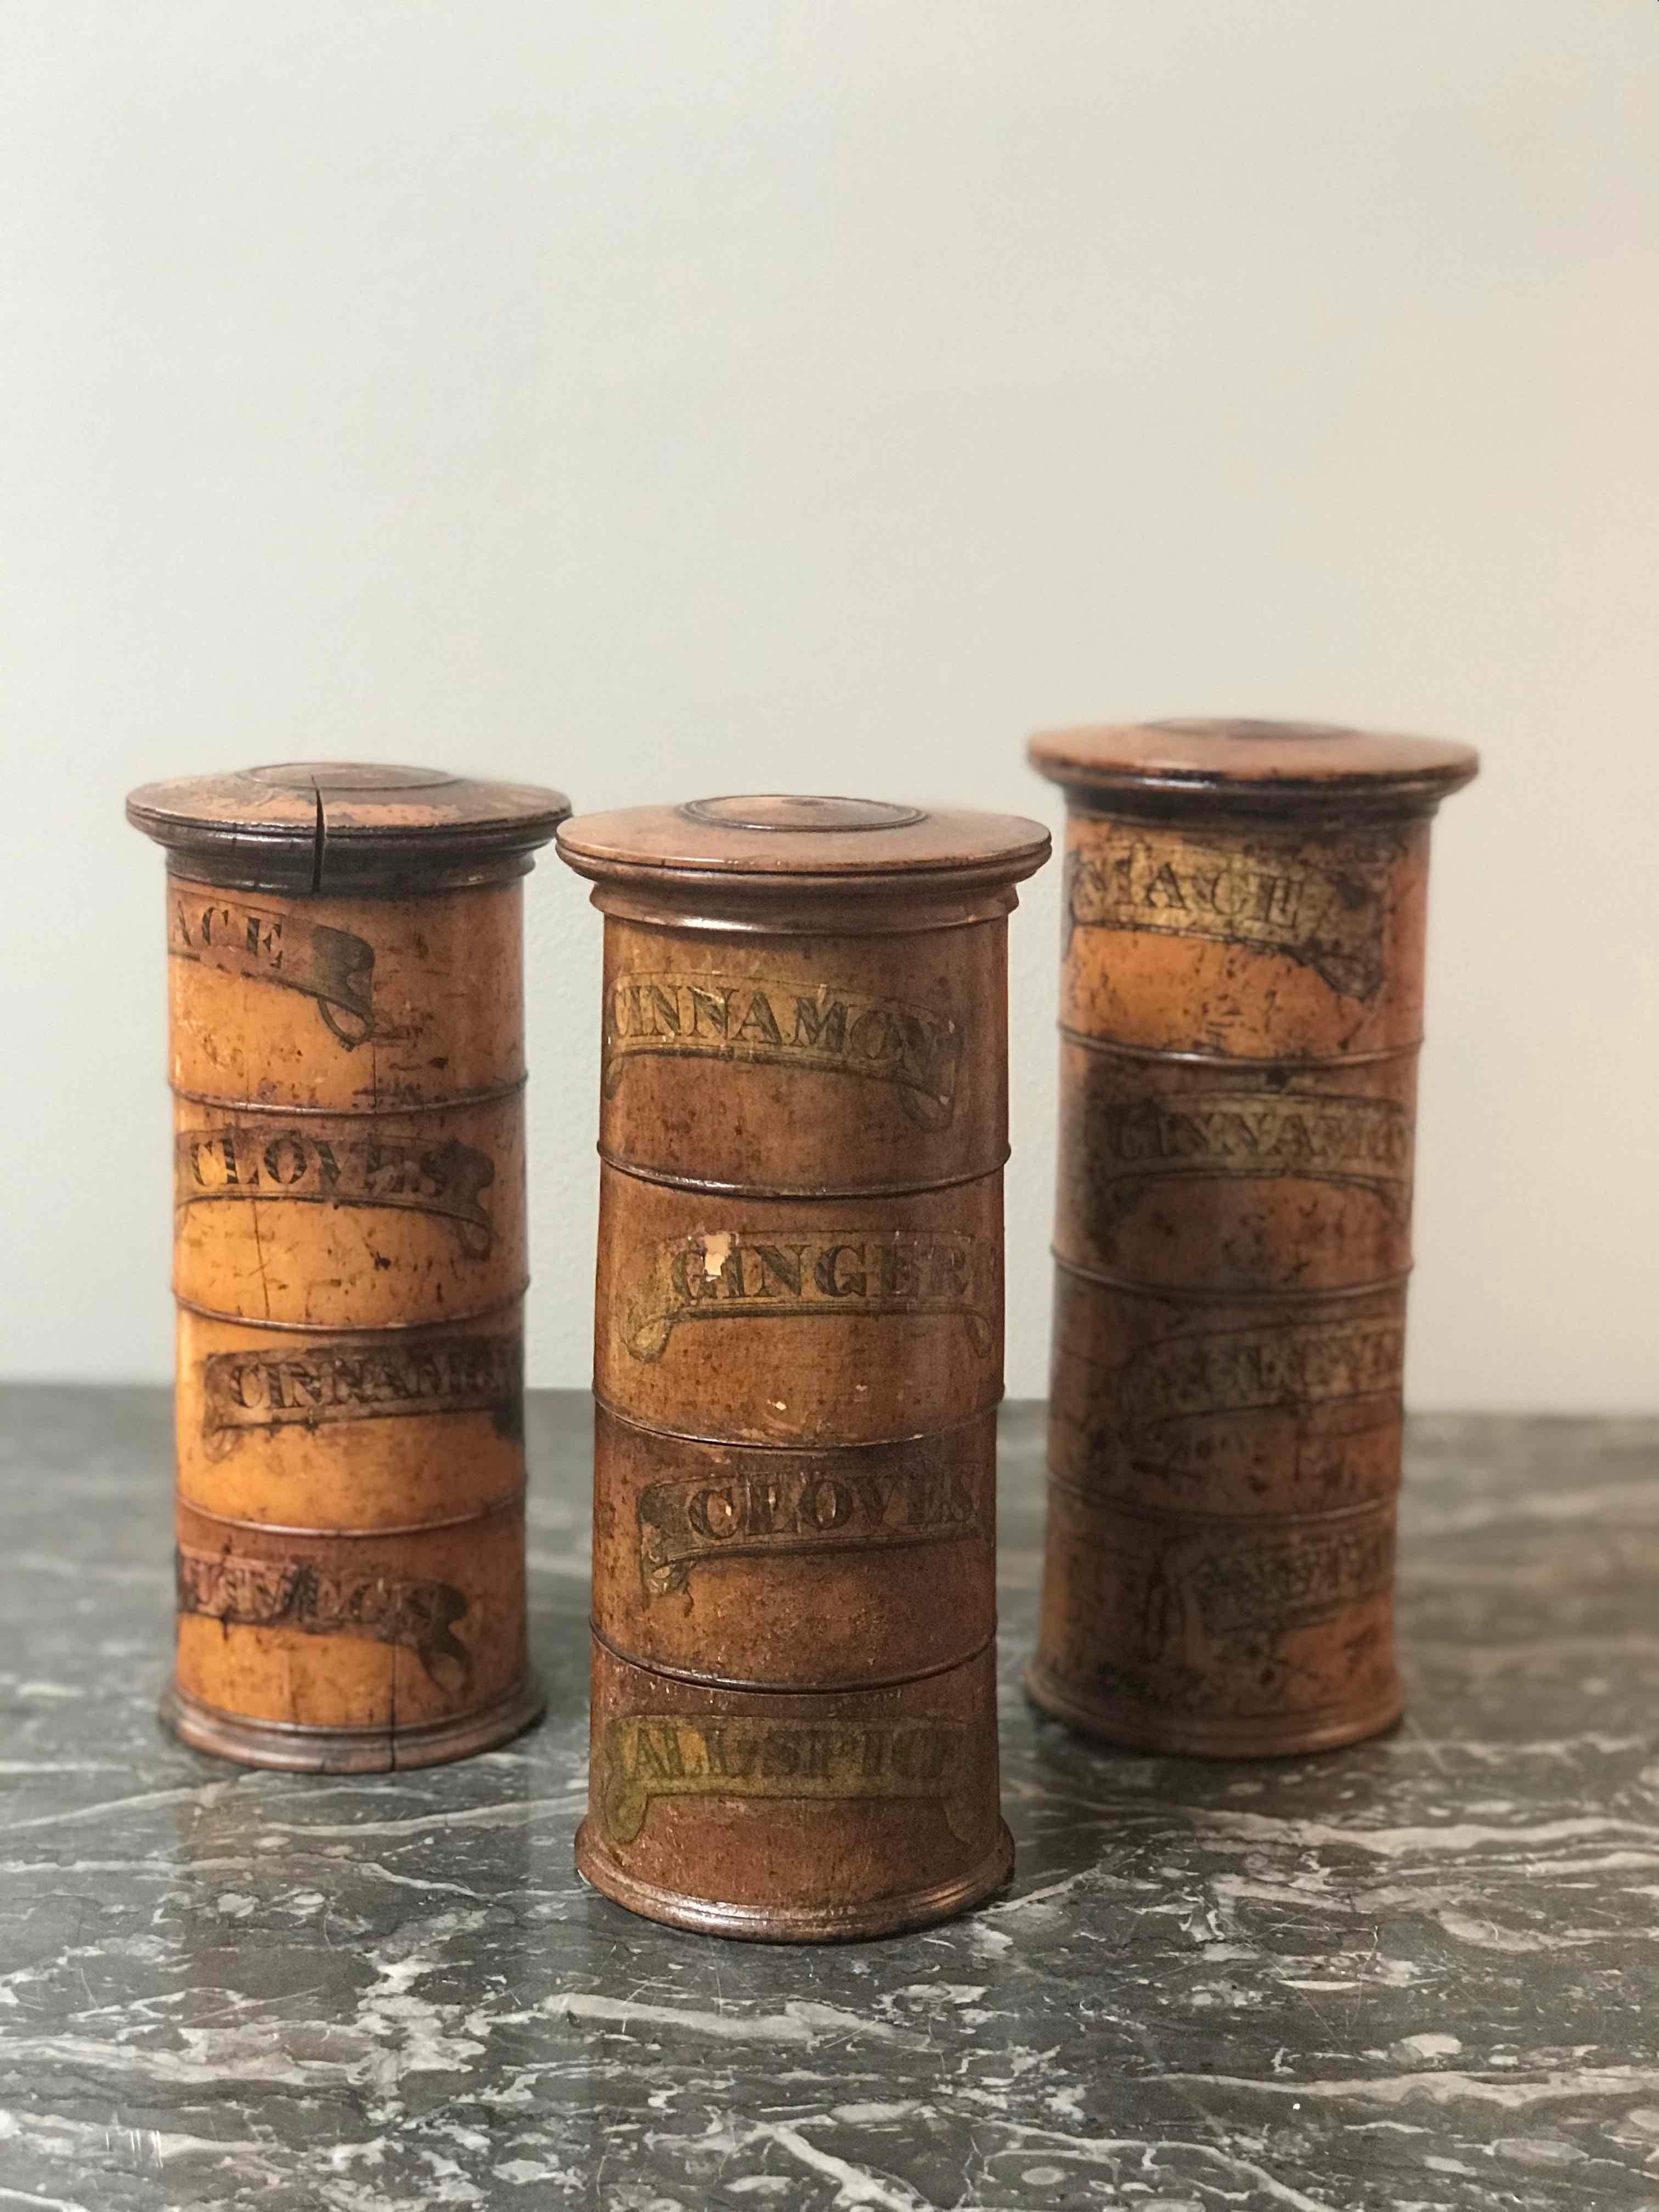 Three-tiered wooden spice tower from mid 19th-century England. With compartments beautifully labeled for cinnamon, cloves, ginger, and allspice, this rustic wooden vessel has taken on a unique patina over its life. The charming typography harkens